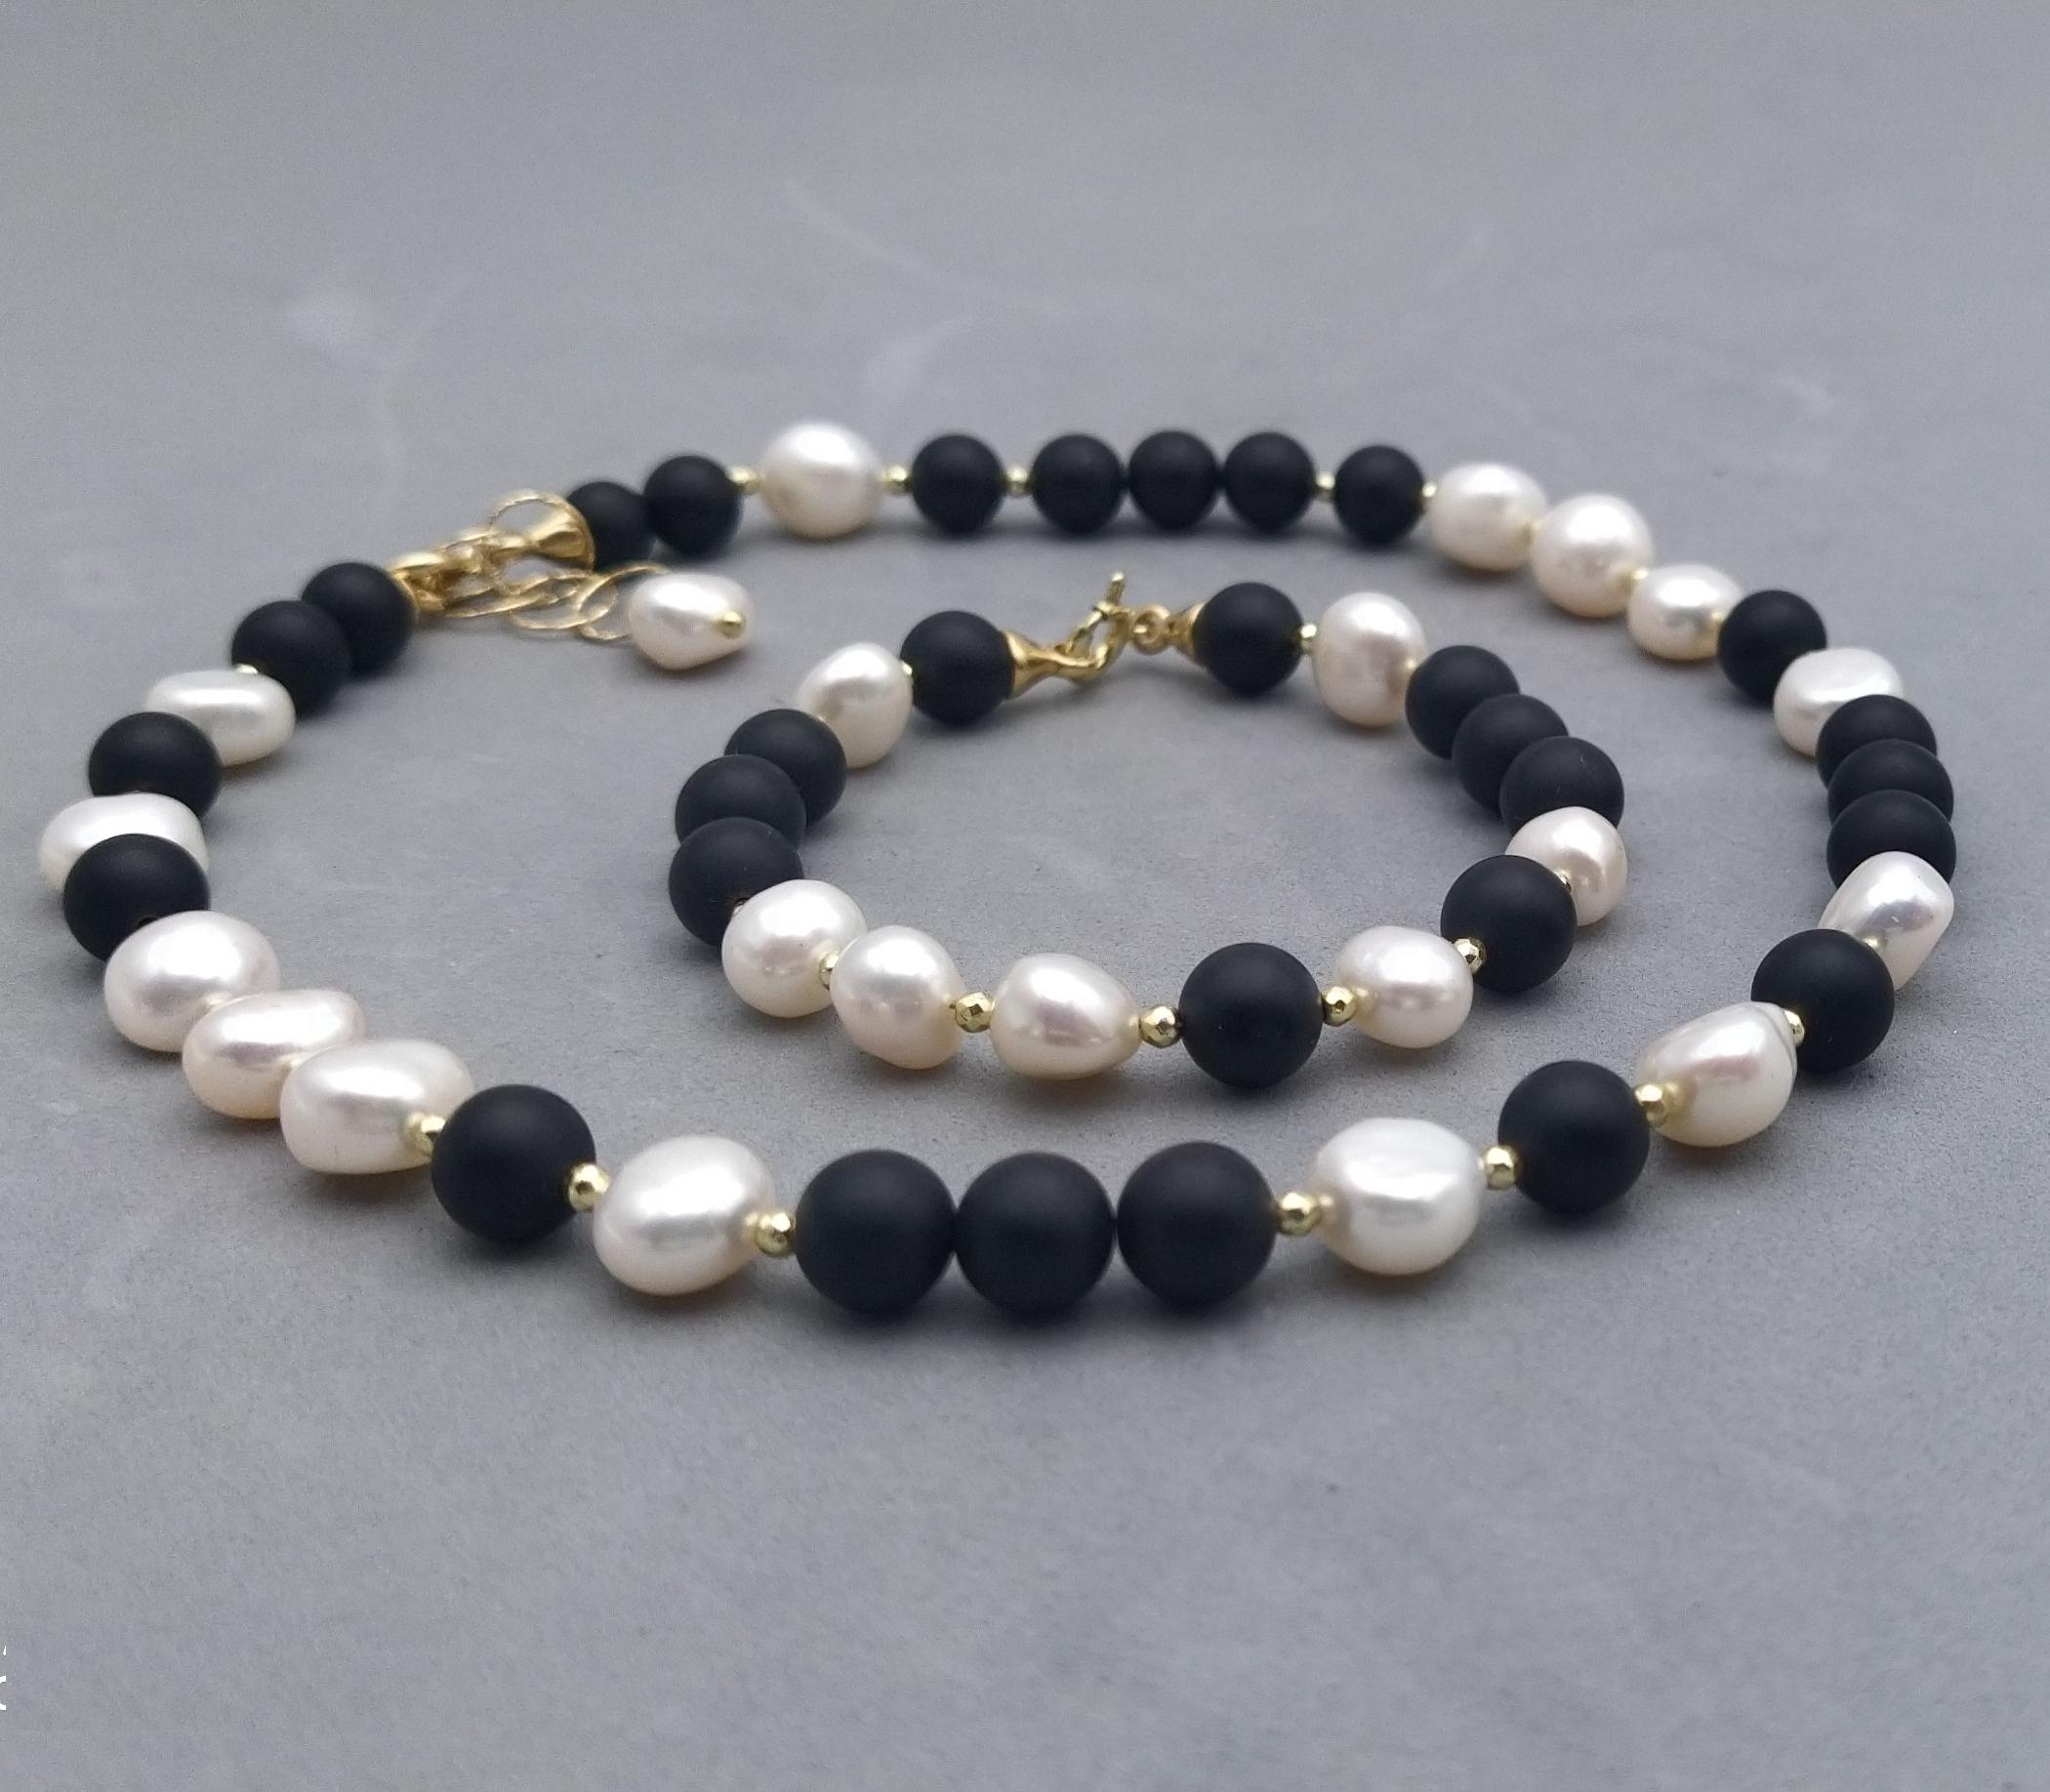 satin black agate and pearls choker and bracelet